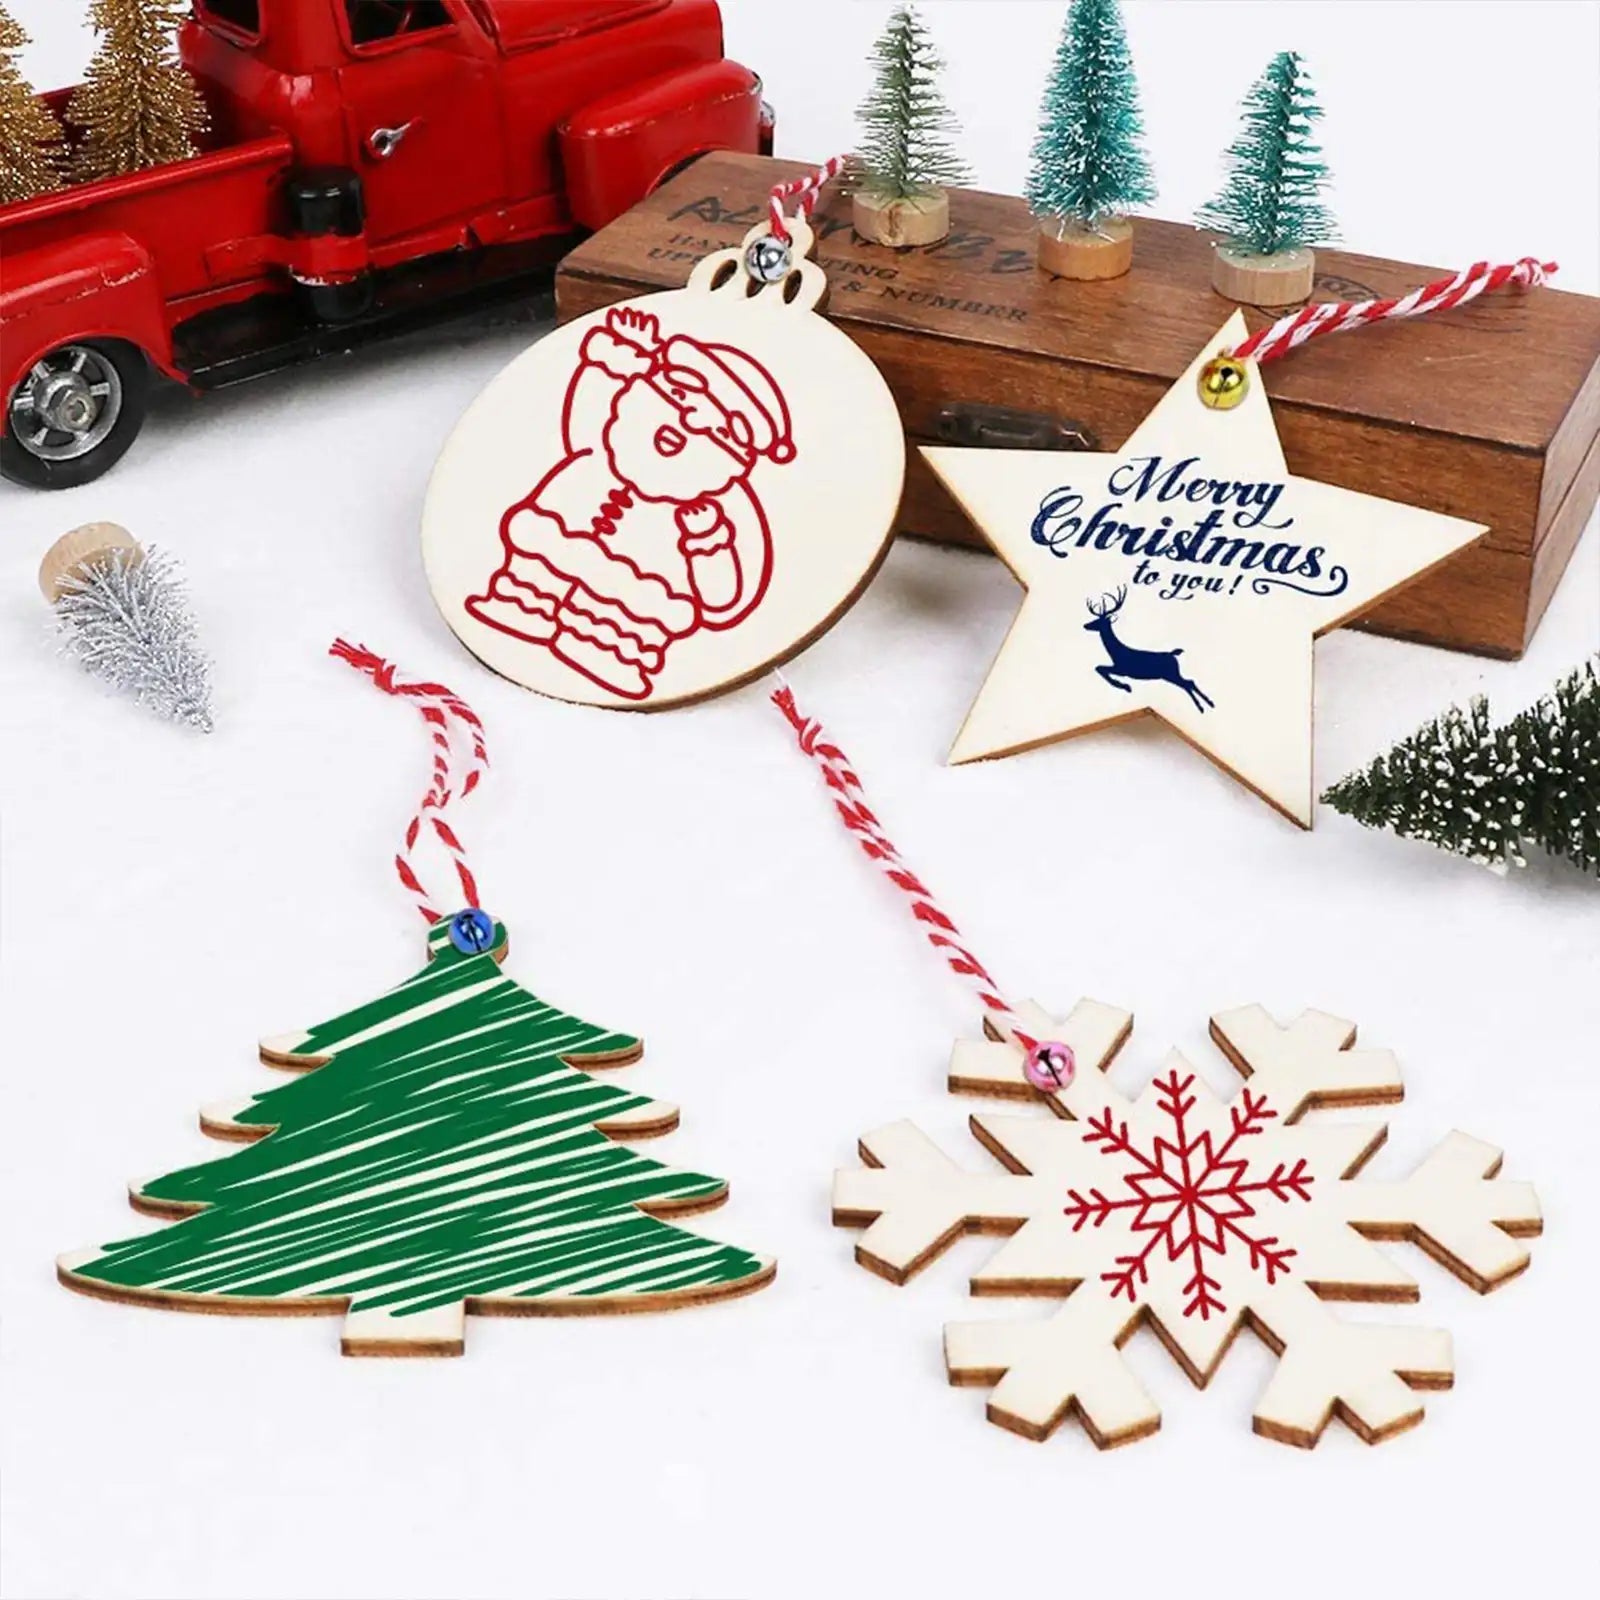 40pcs Wooden Christmas Ornaments Unfinished Wood Slices with Holes for Kids DIY Crafts